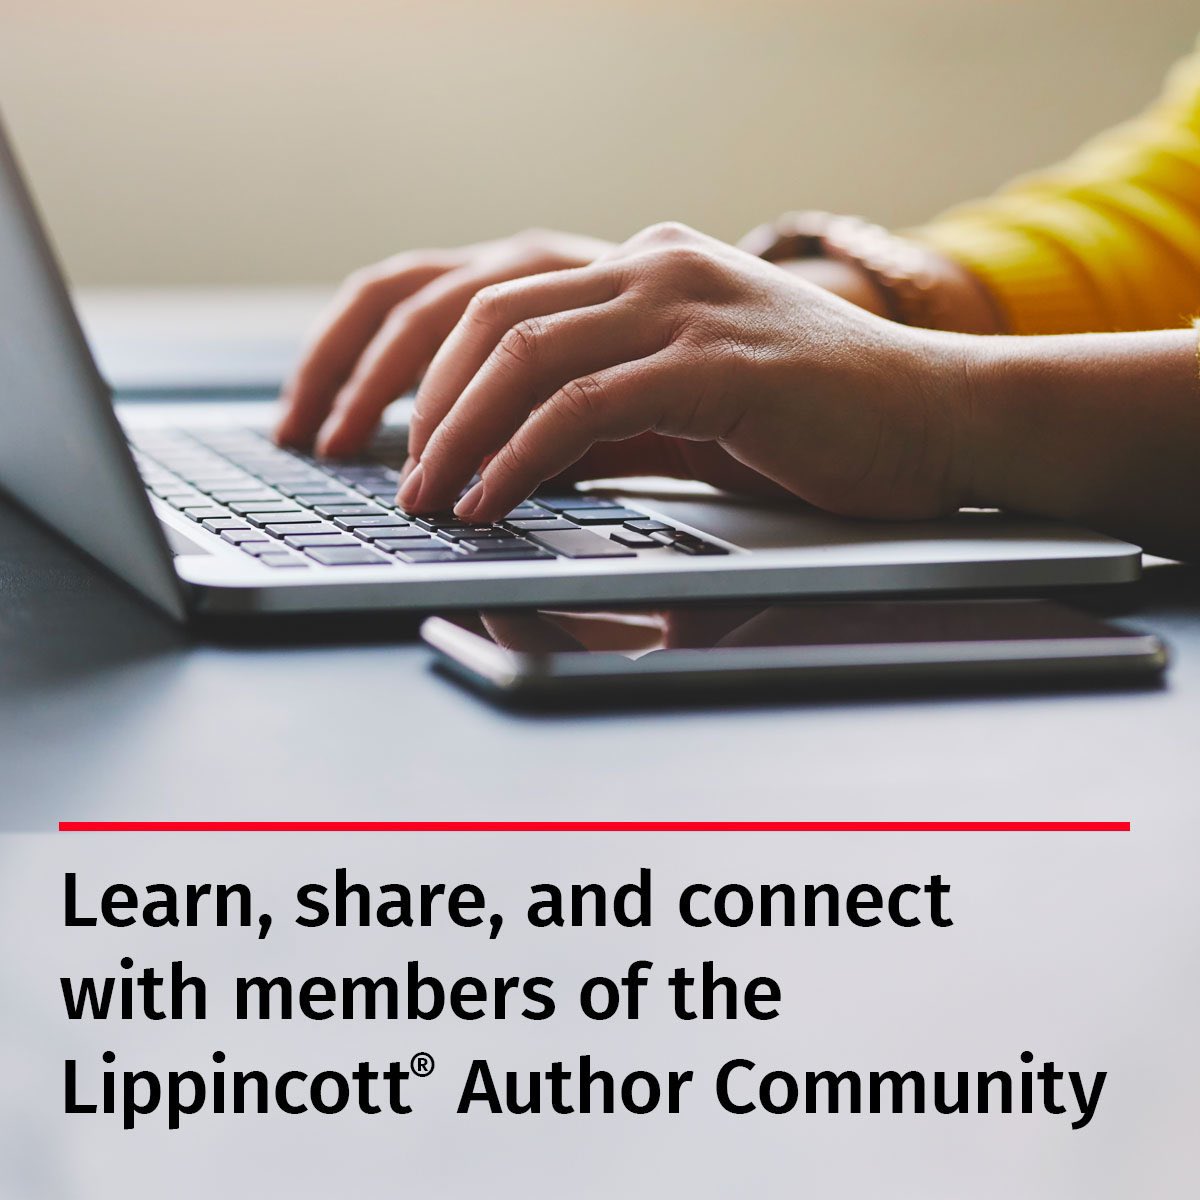 Join the new Lippincott Author Community @LippincottMed for resources and support to help you finish/publish your next article: community.lww.com #Scicomm #MedEd #MedX #ScienceTwitter #AcademicWriting #AcademicChatter #AcademicTwitter @wkhealth @ovid_wkhealth